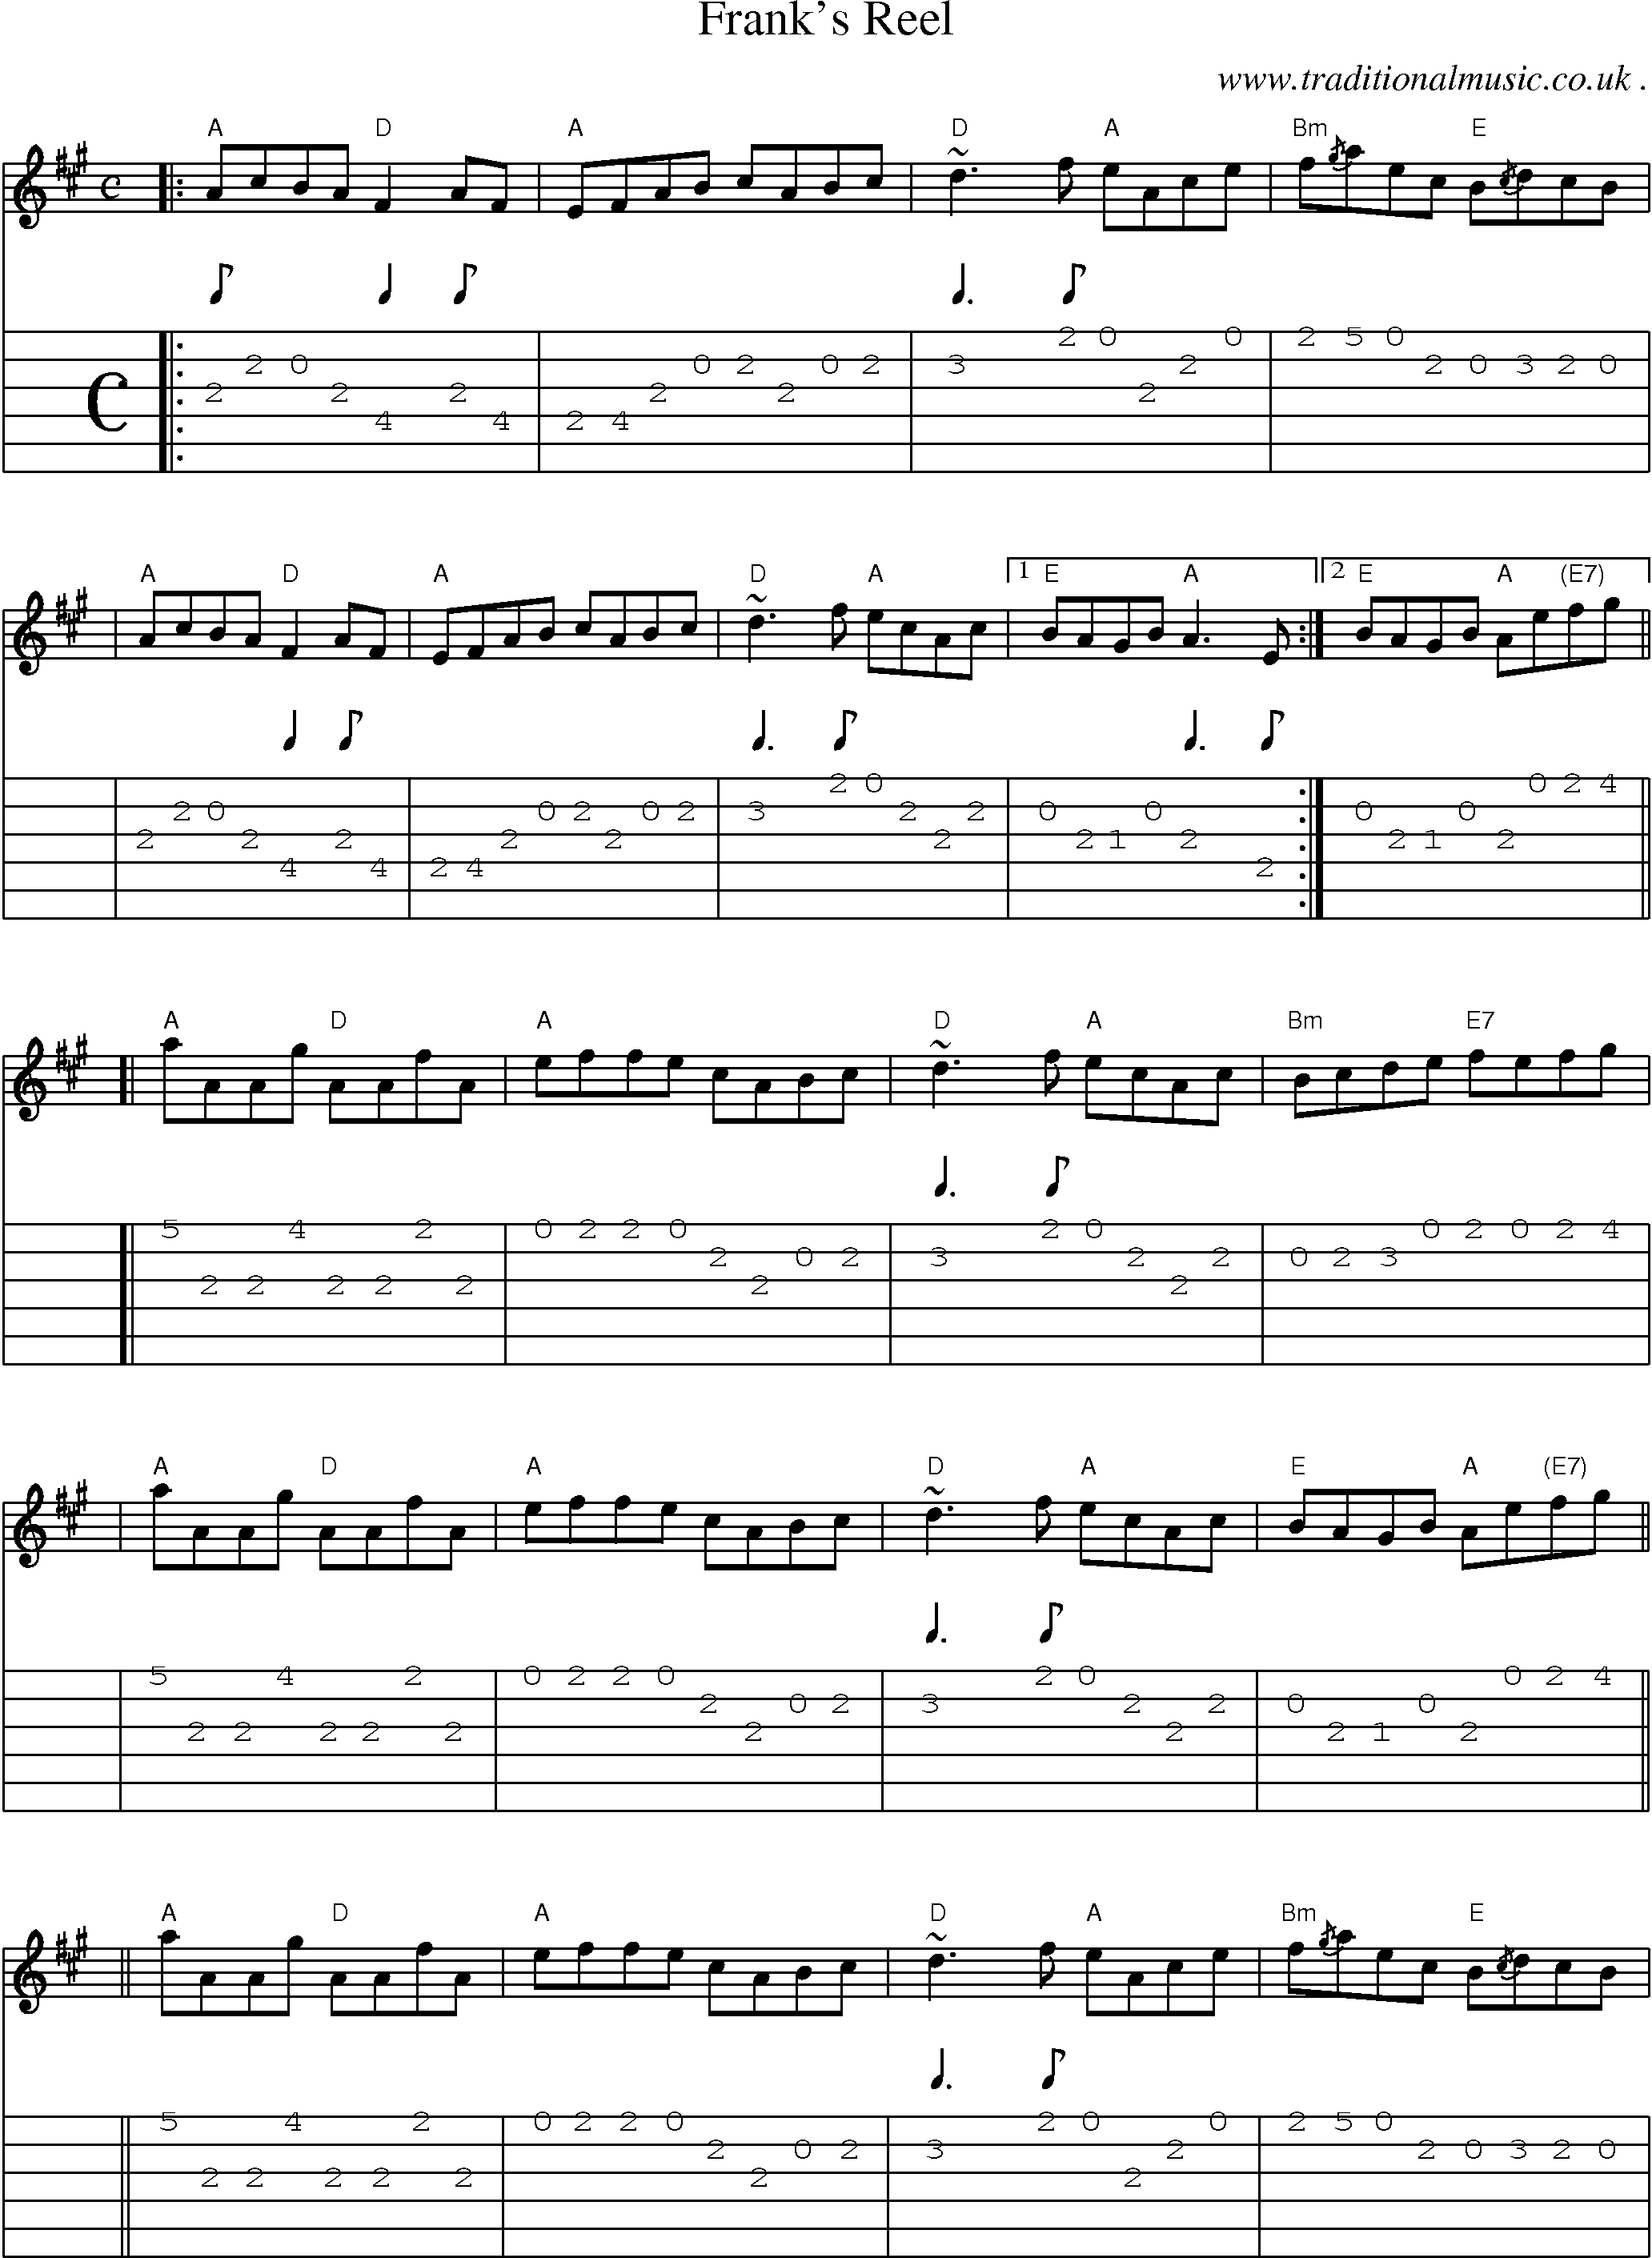 Sheet-music  score, Chords and Guitar Tabs for Franks Reel